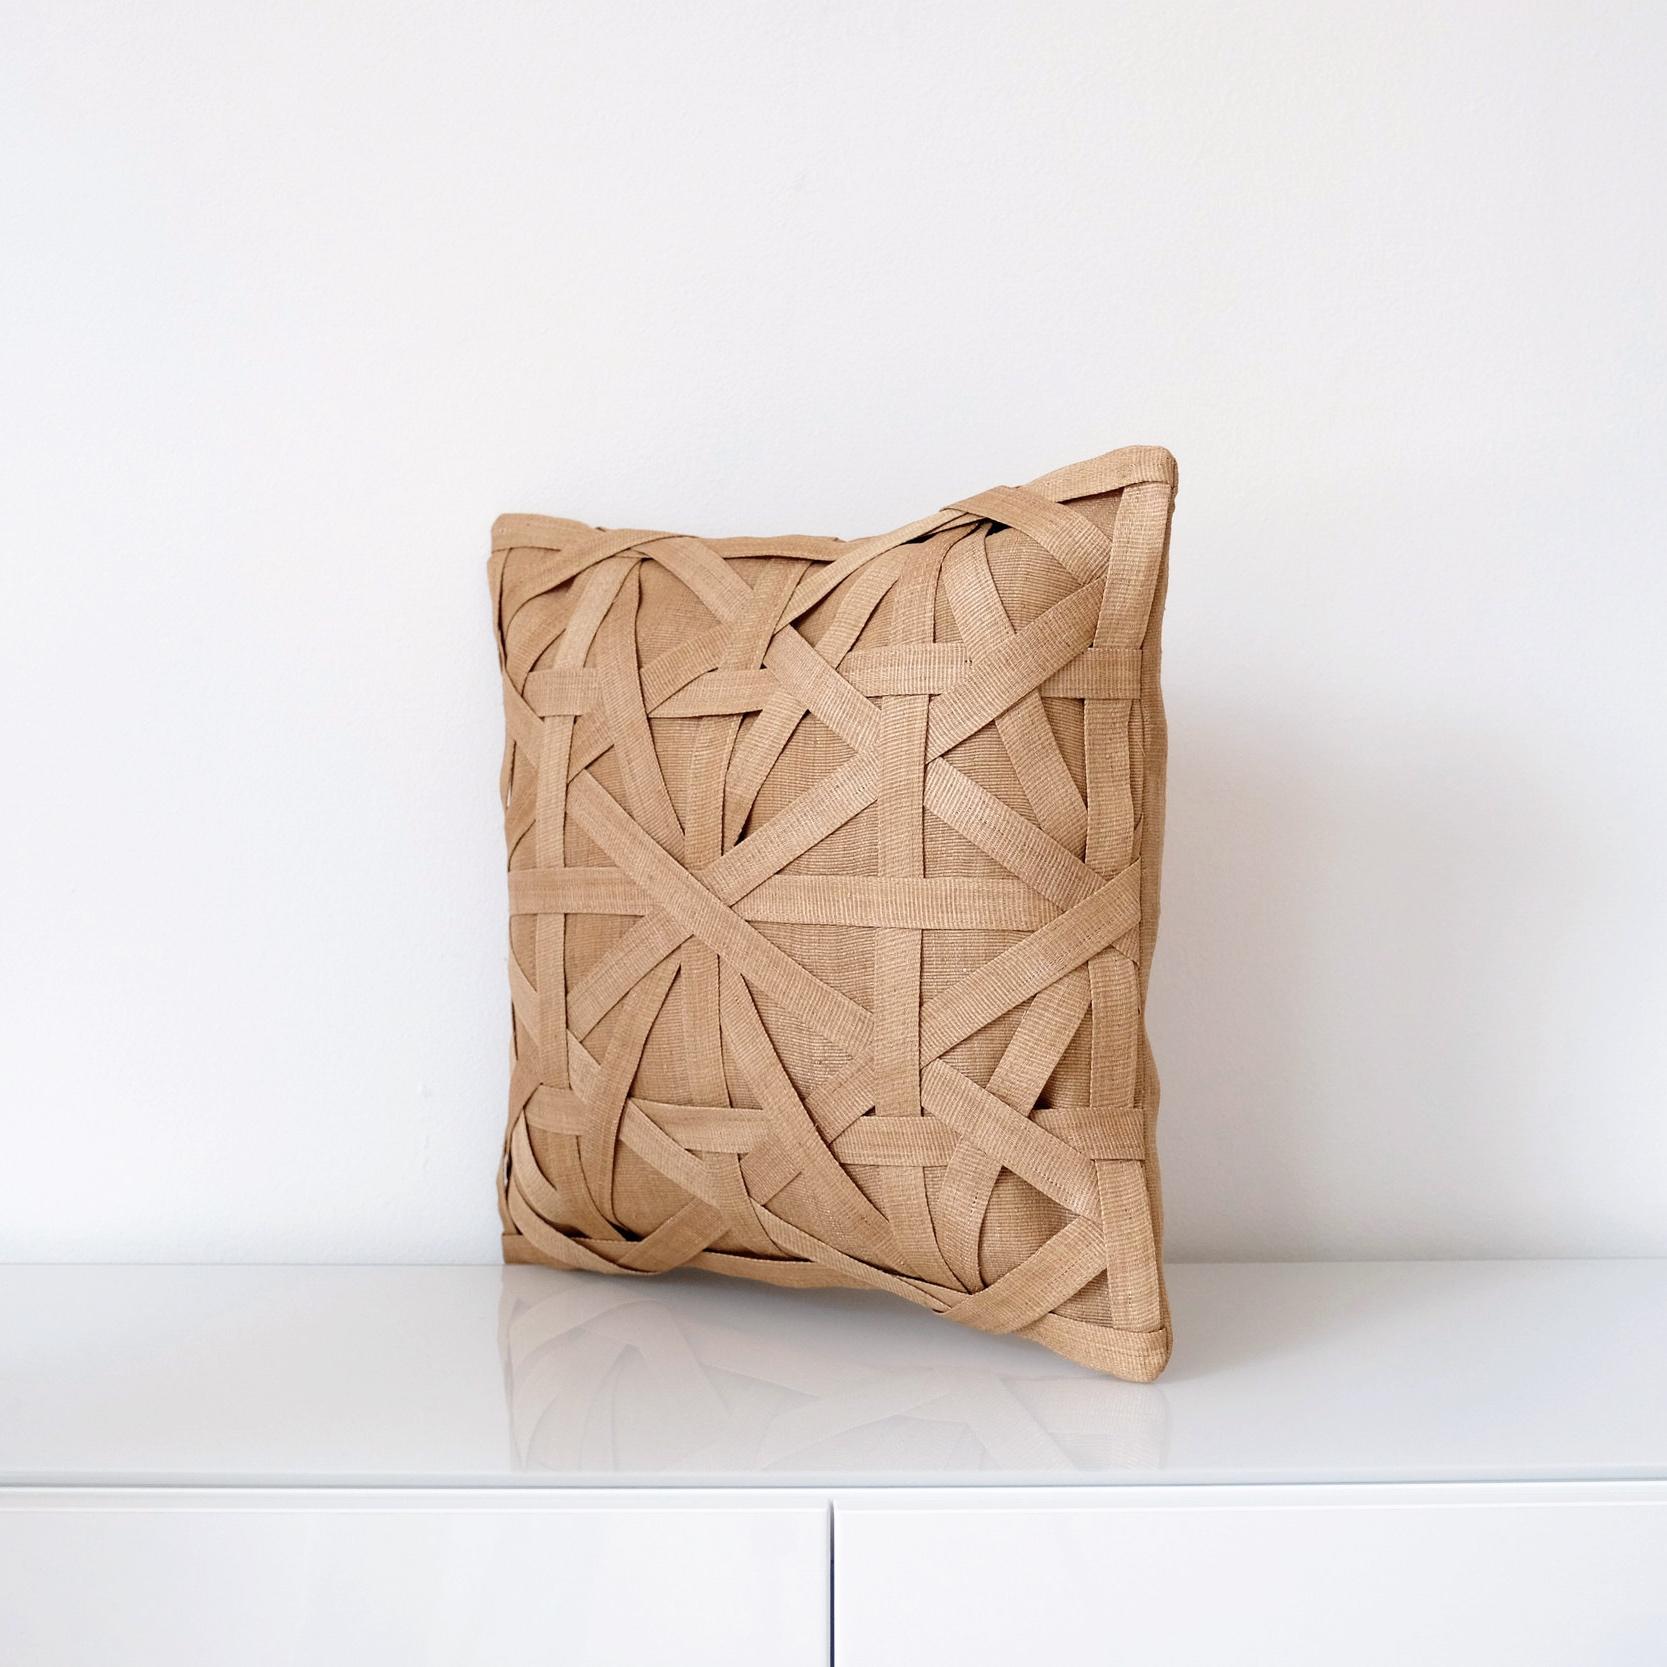 Handcrafted cushion cover made with naturally dyed and delicately woven T’nalak cloth from Abaca fibres and fastened with coconut shell buttons
Colour: light sand and oatmeal

Measures: 45 x 45 cm
17.7? x 17.7?
Recommended cushion filler: 56 x